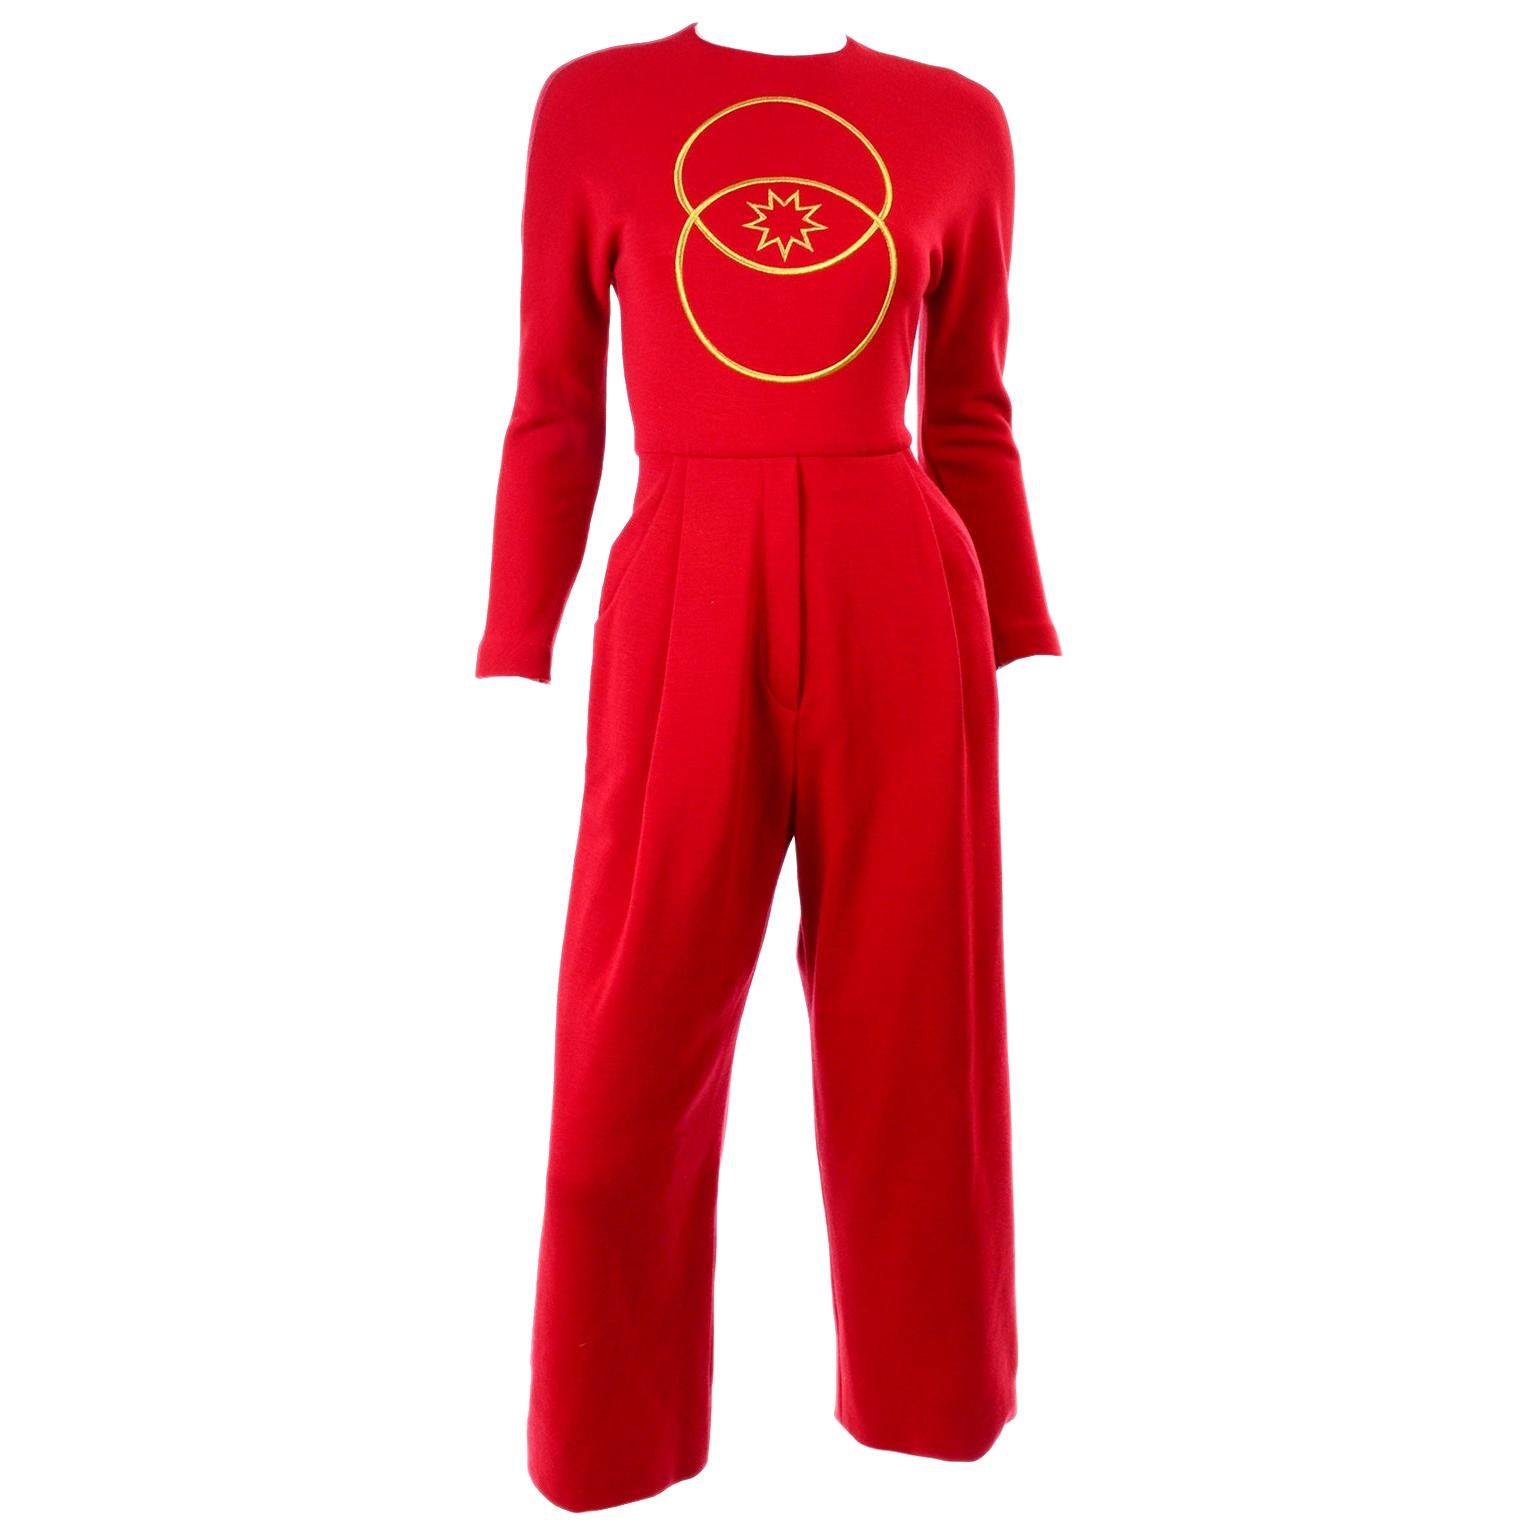 Red Vintage 1980s Geoffrey Beene Jumpsuit With Gold Circle and Star Embroidery For Sale